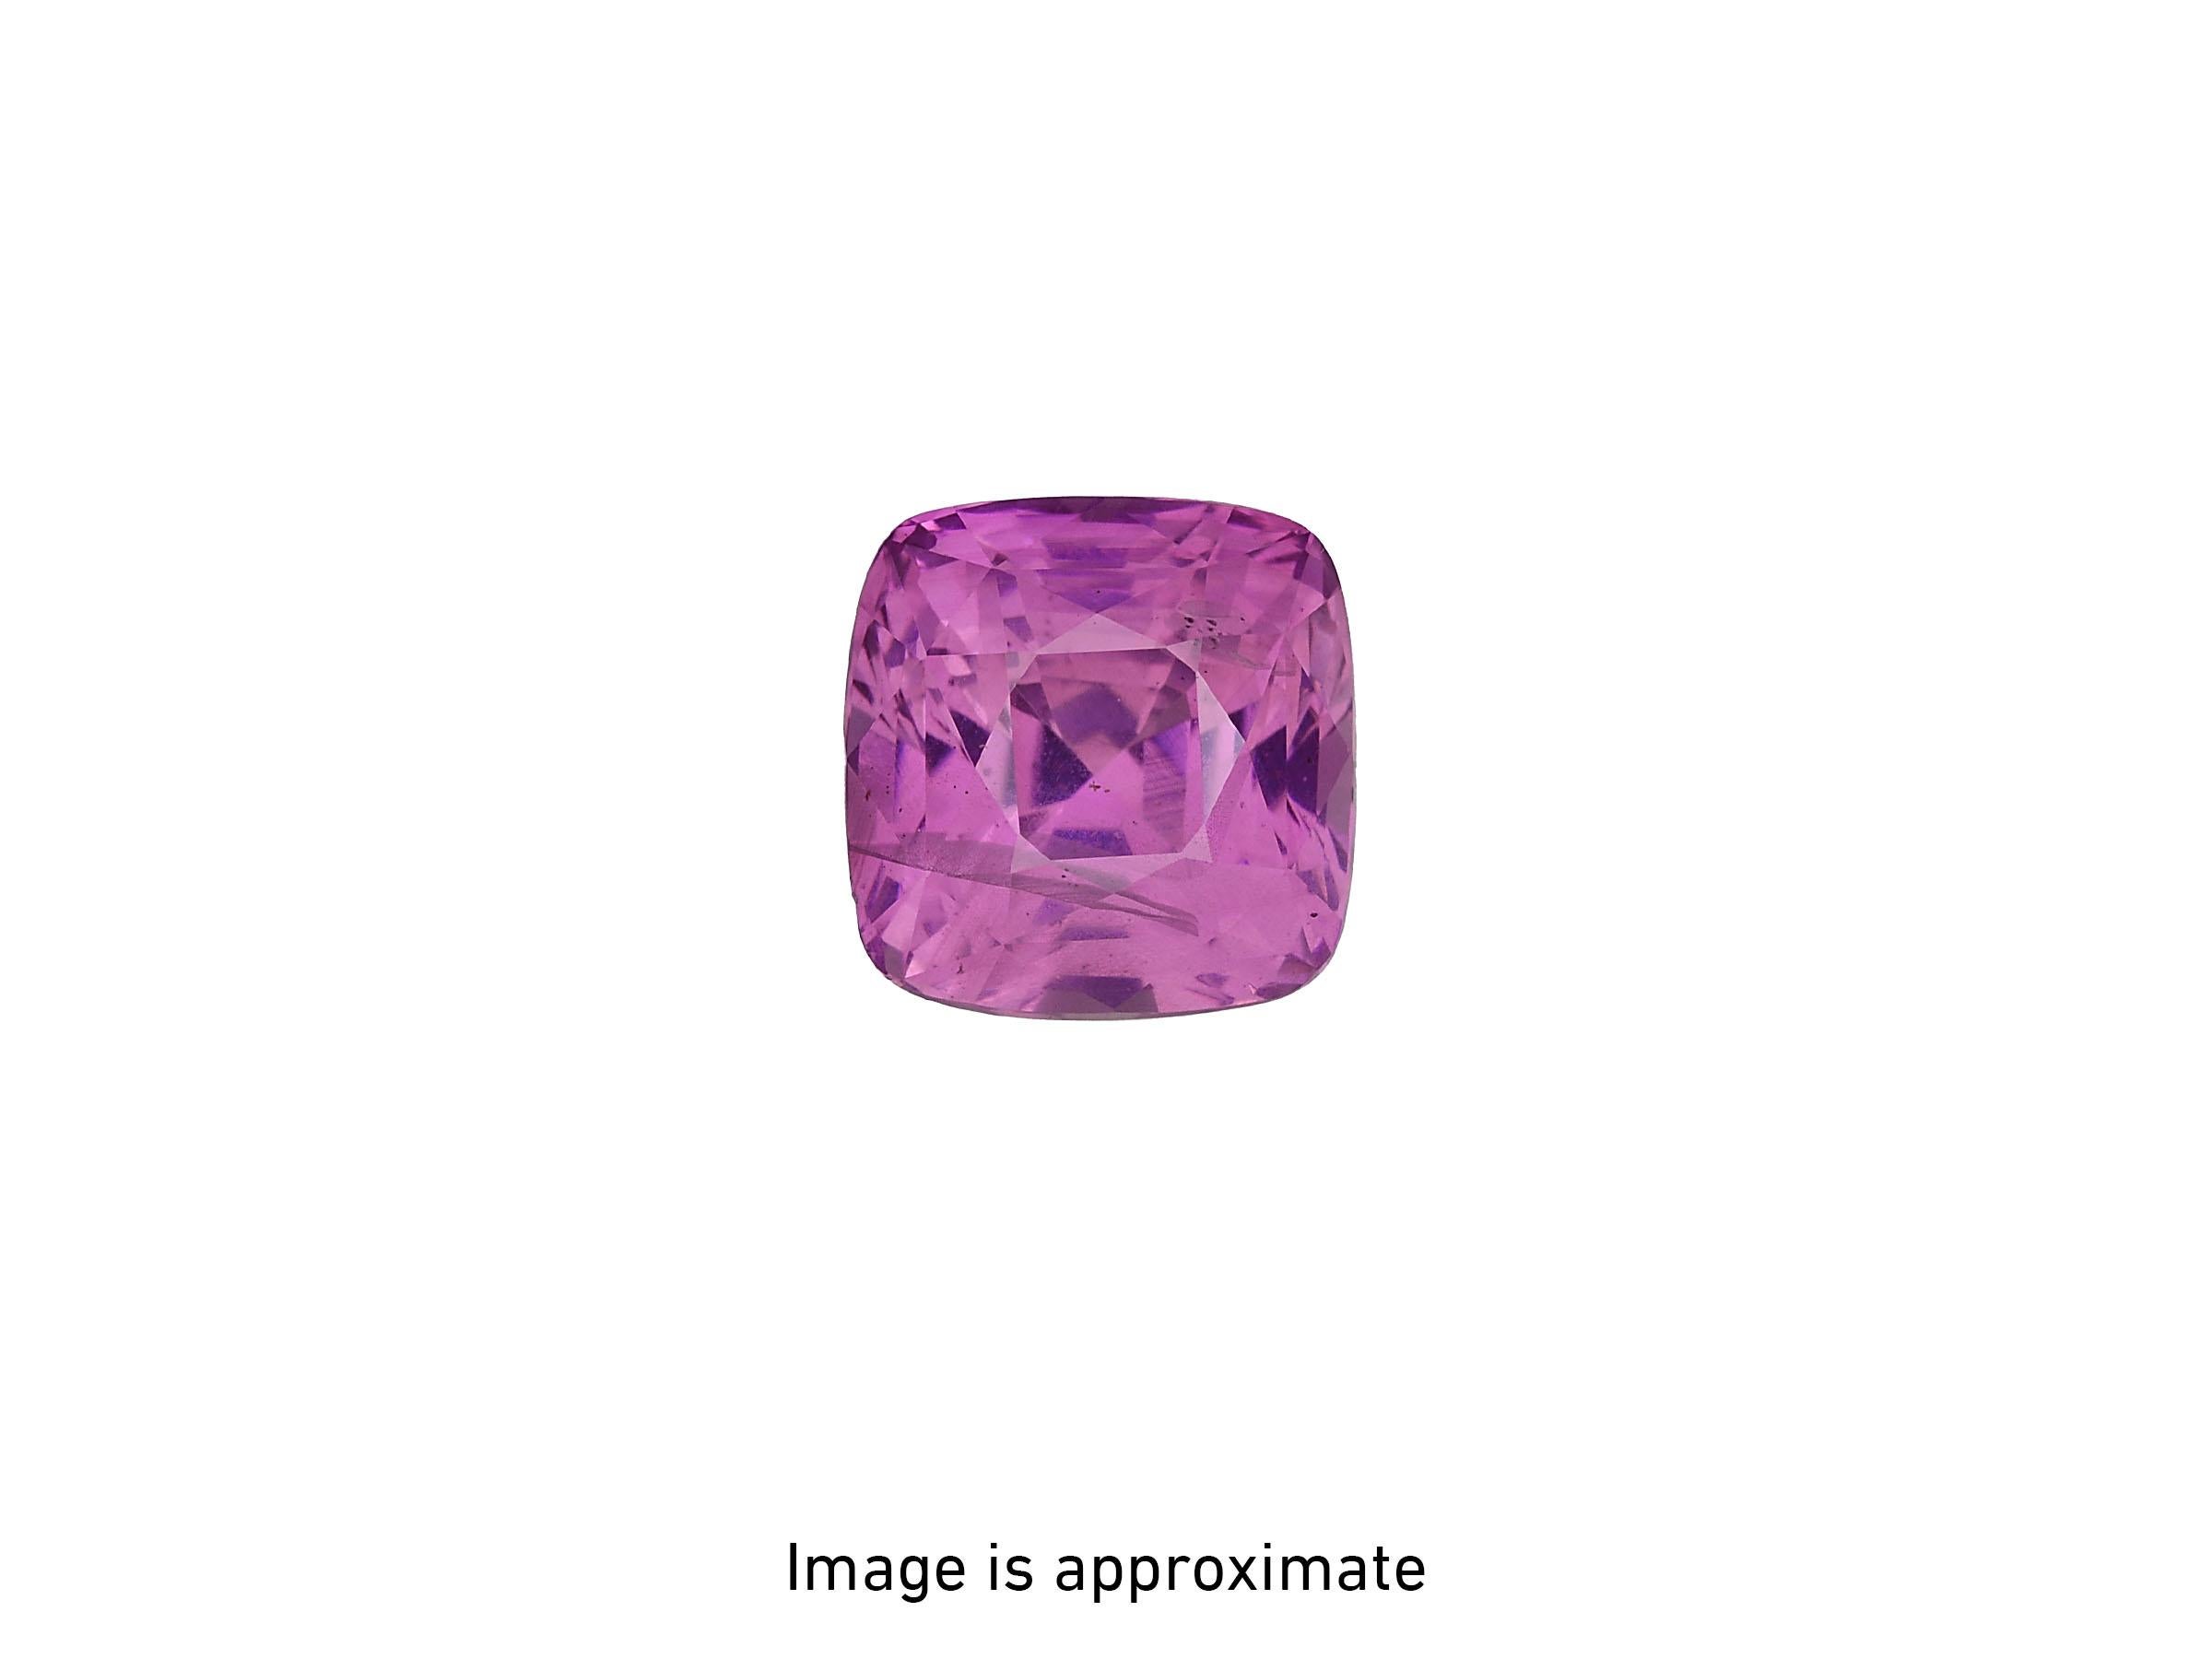 Modern 4.72ct untreated cushion-cut Pink Sapphire ring. GIA certified. For Sale